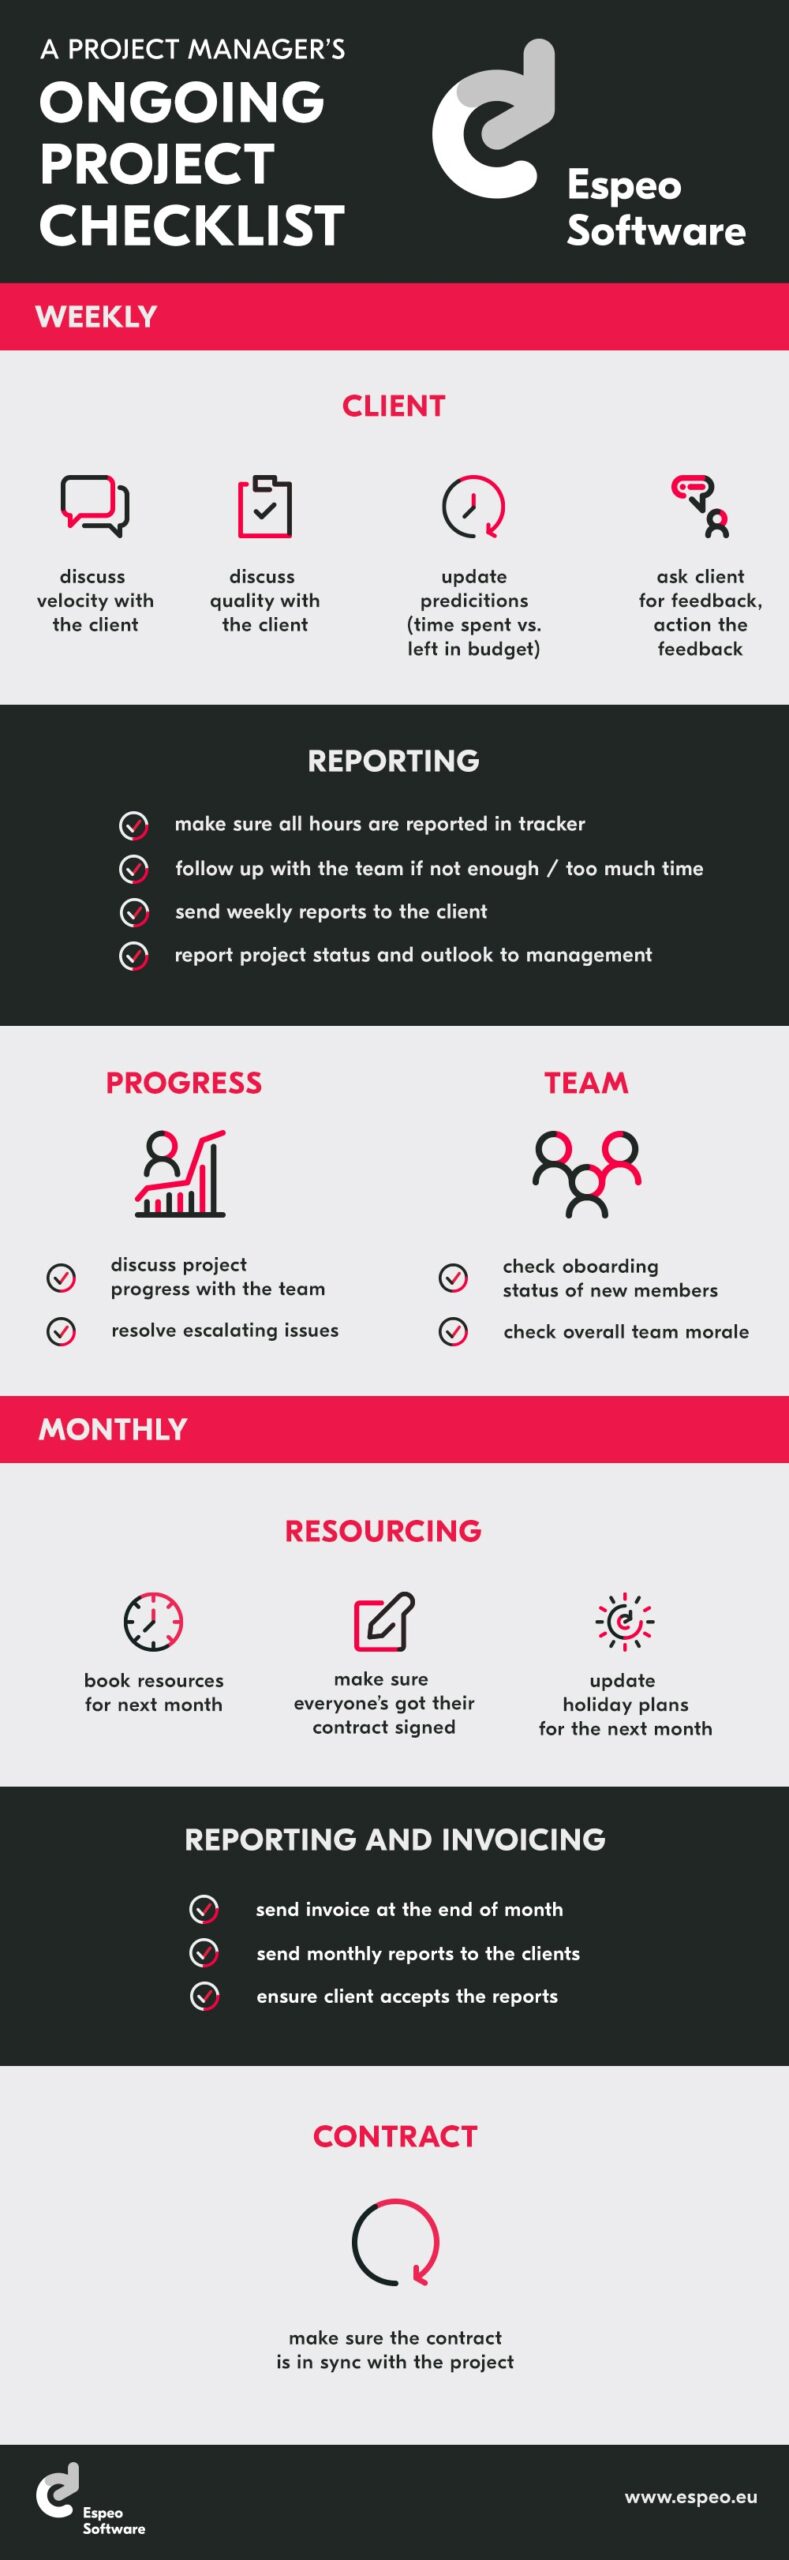 Project management tips for ongoing projects